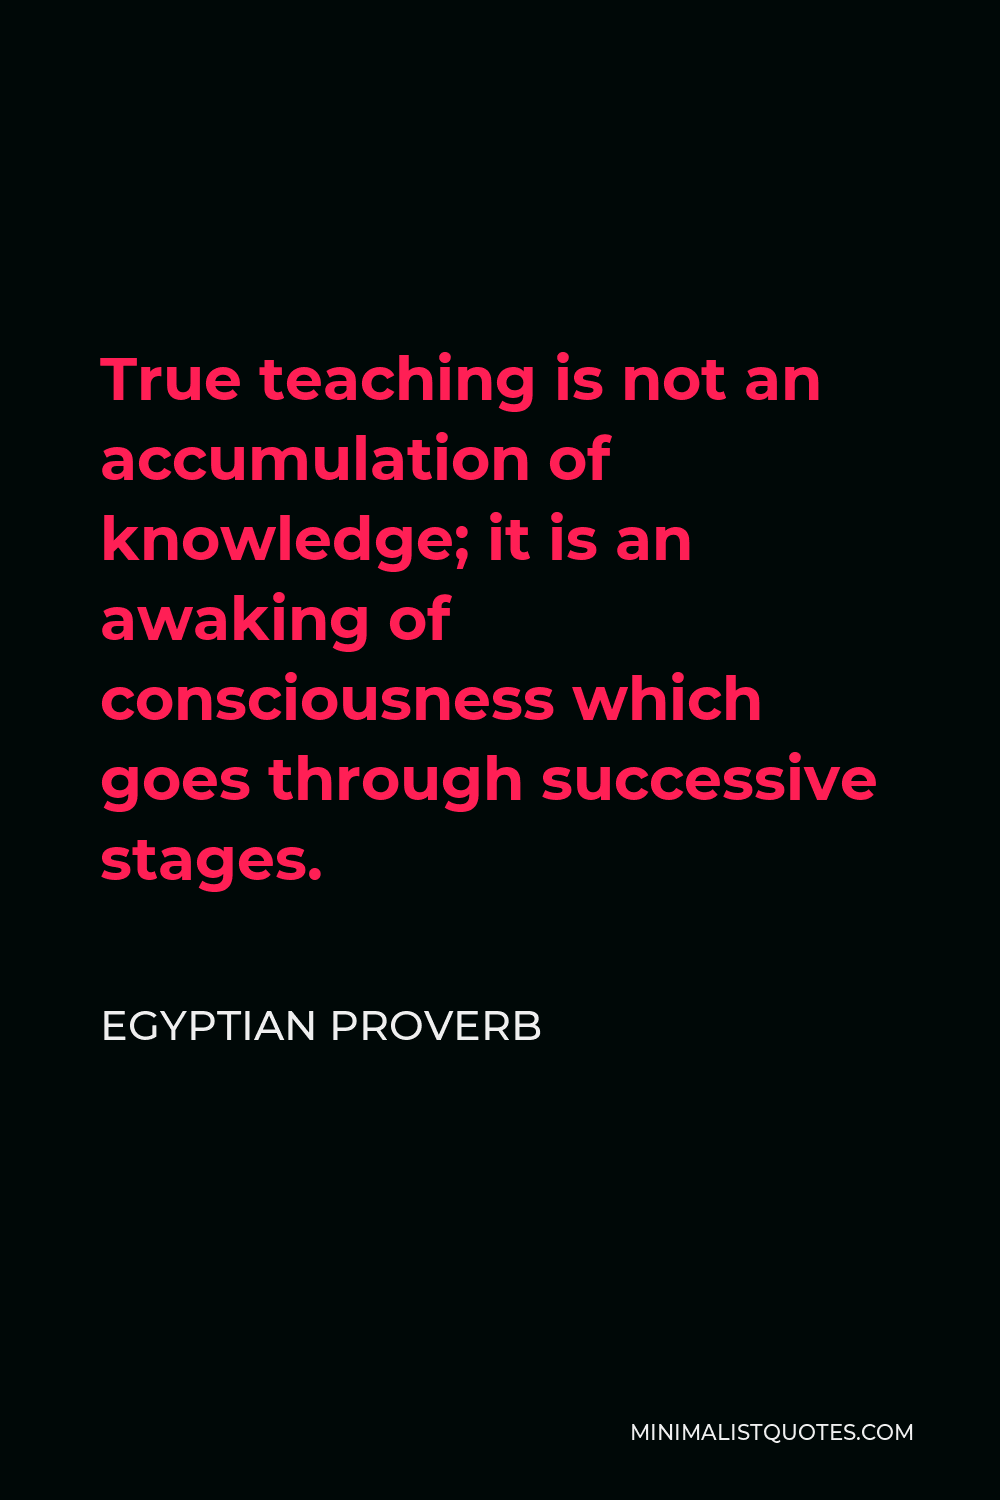 Egyptian Proverb Quote - True teaching is not an accumulation of knowledge; it is an awaking of consciousness which goes through successive stages.